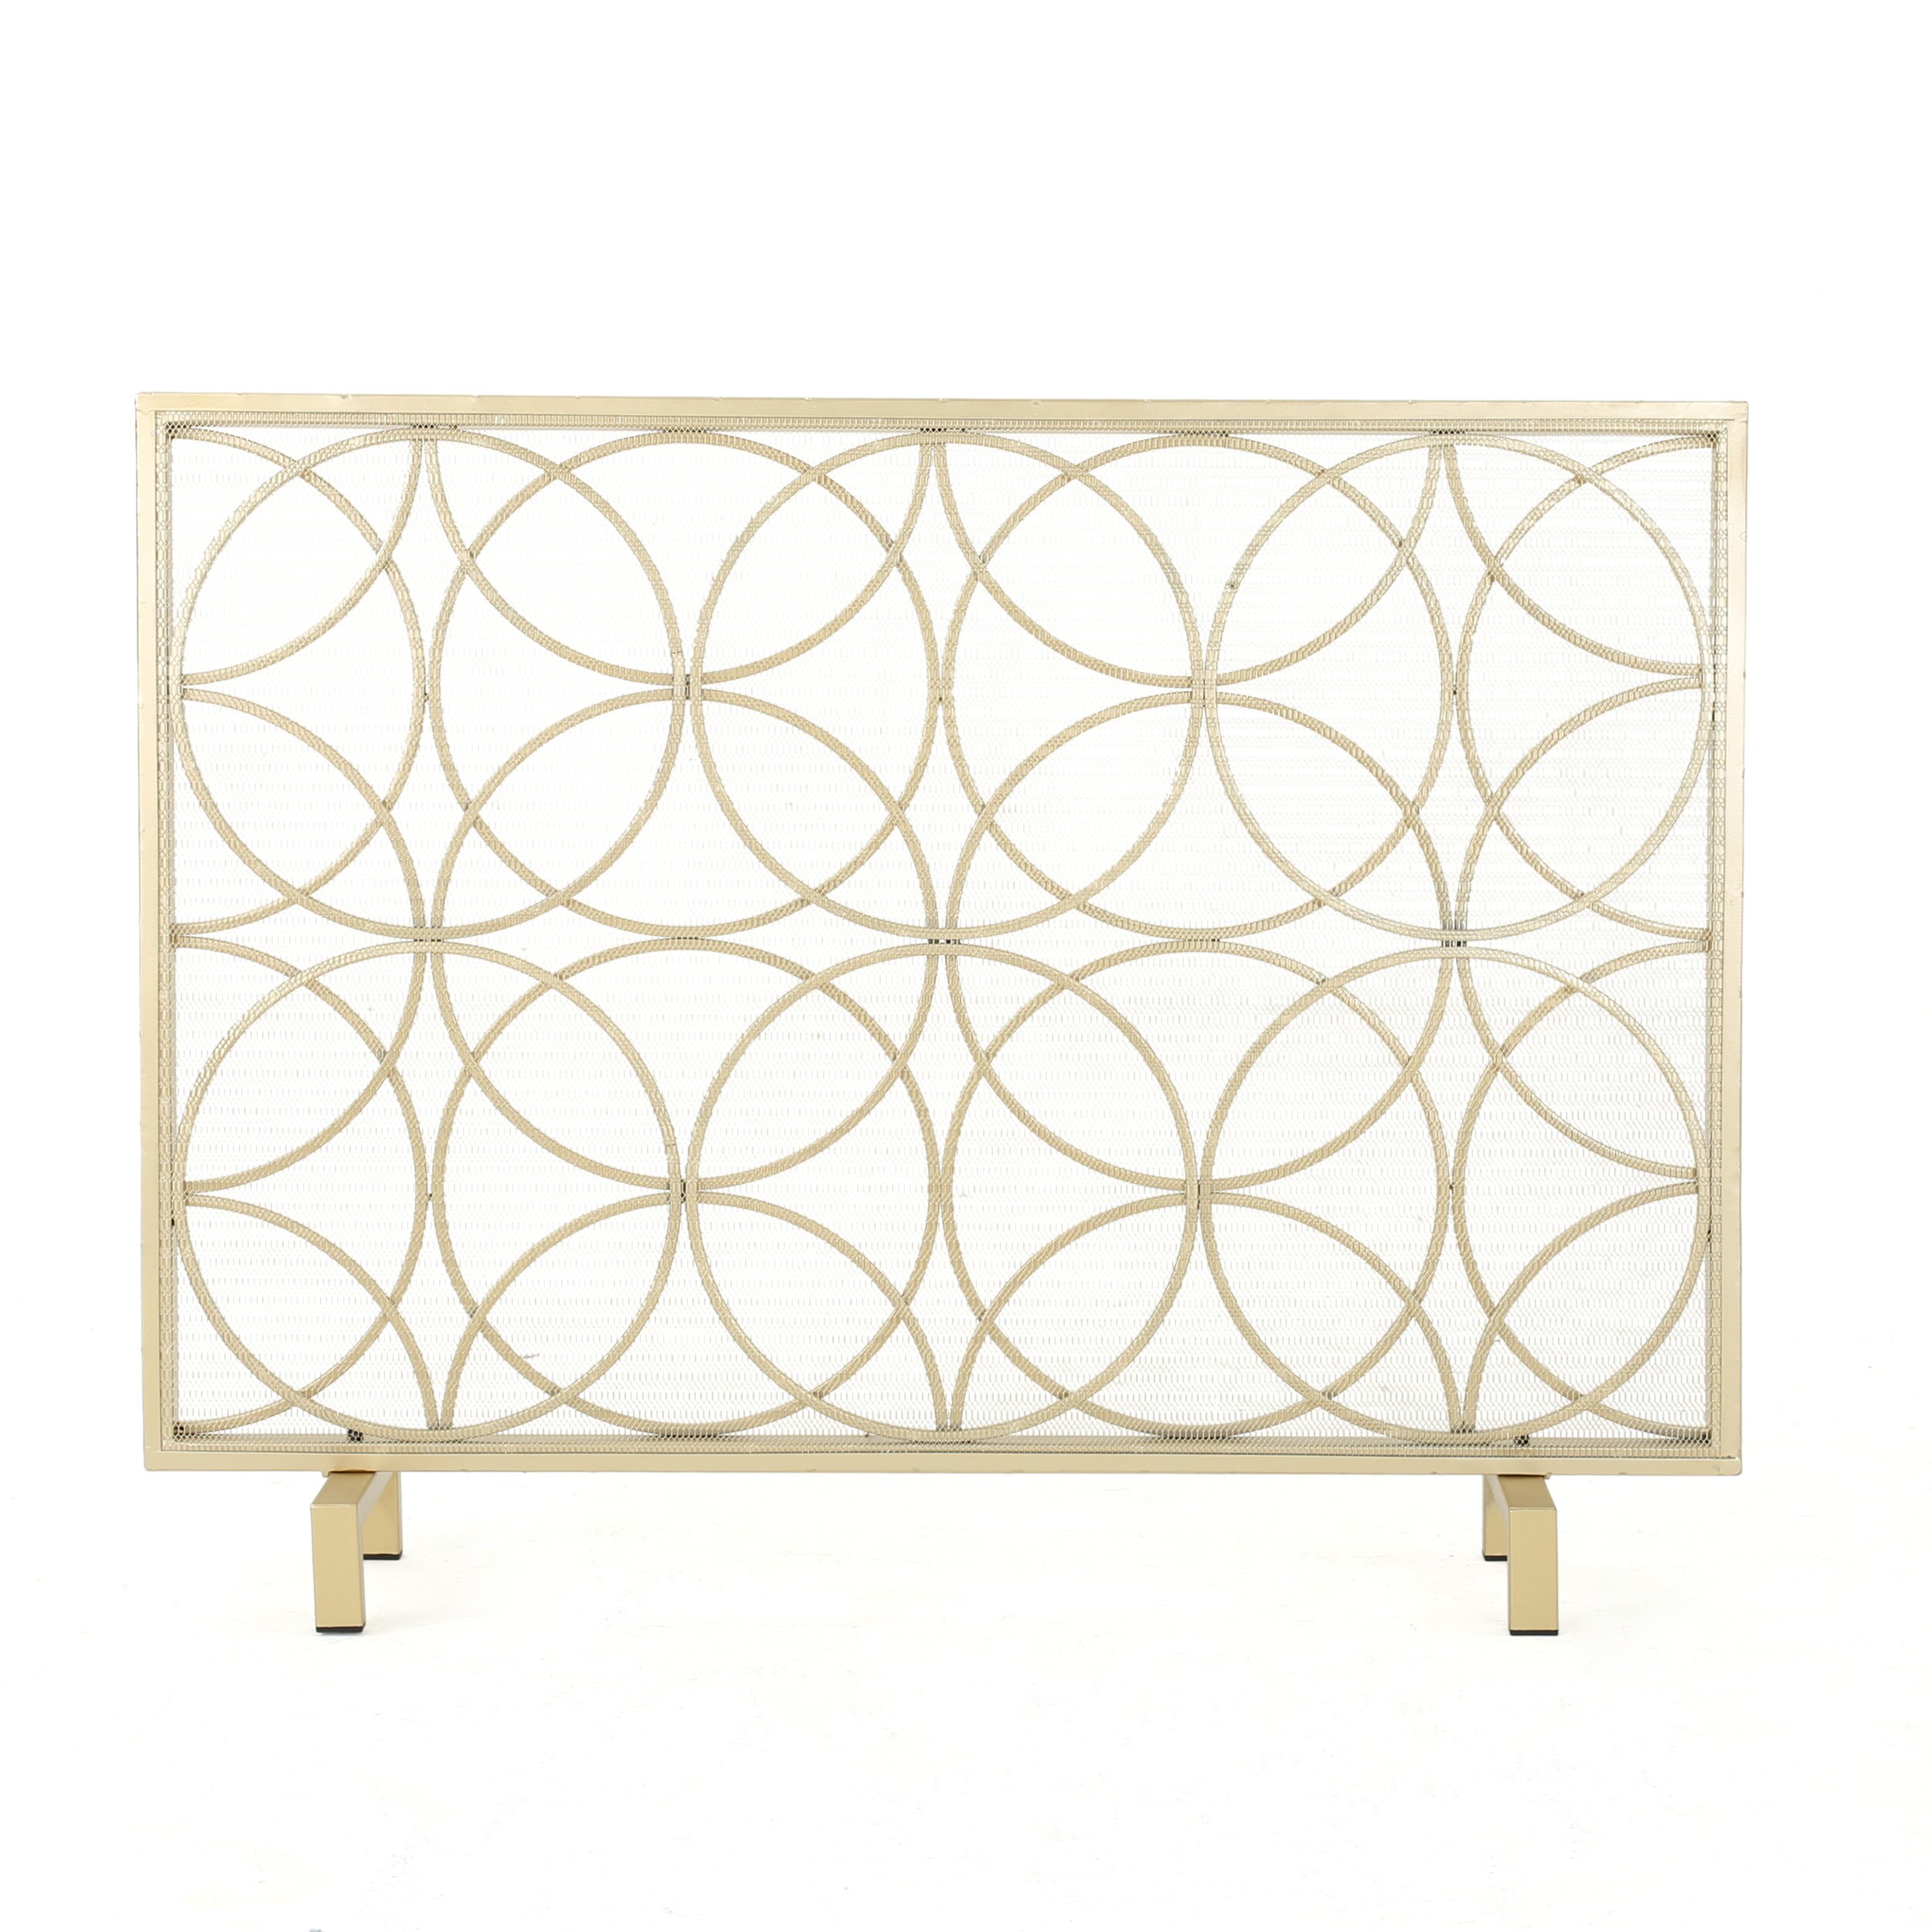 Best Selling Home Decor 41.1-in Gold Iron 1-Panel Flat Fireplace Screen ...